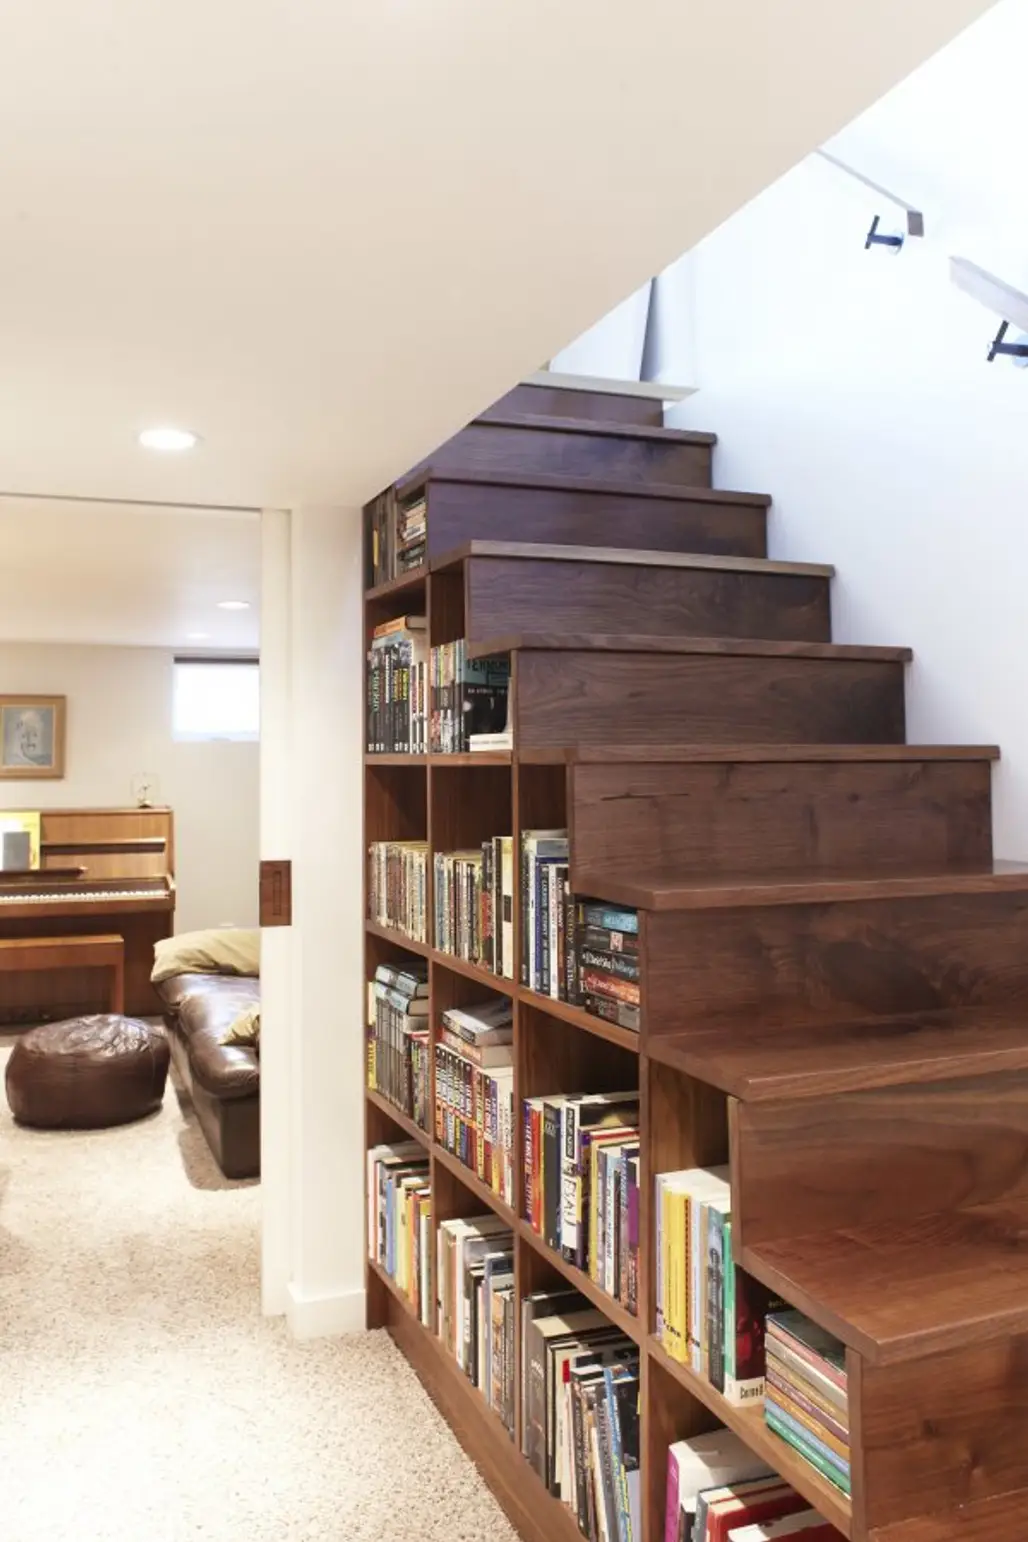 Display Your Book Collection under the Stairs